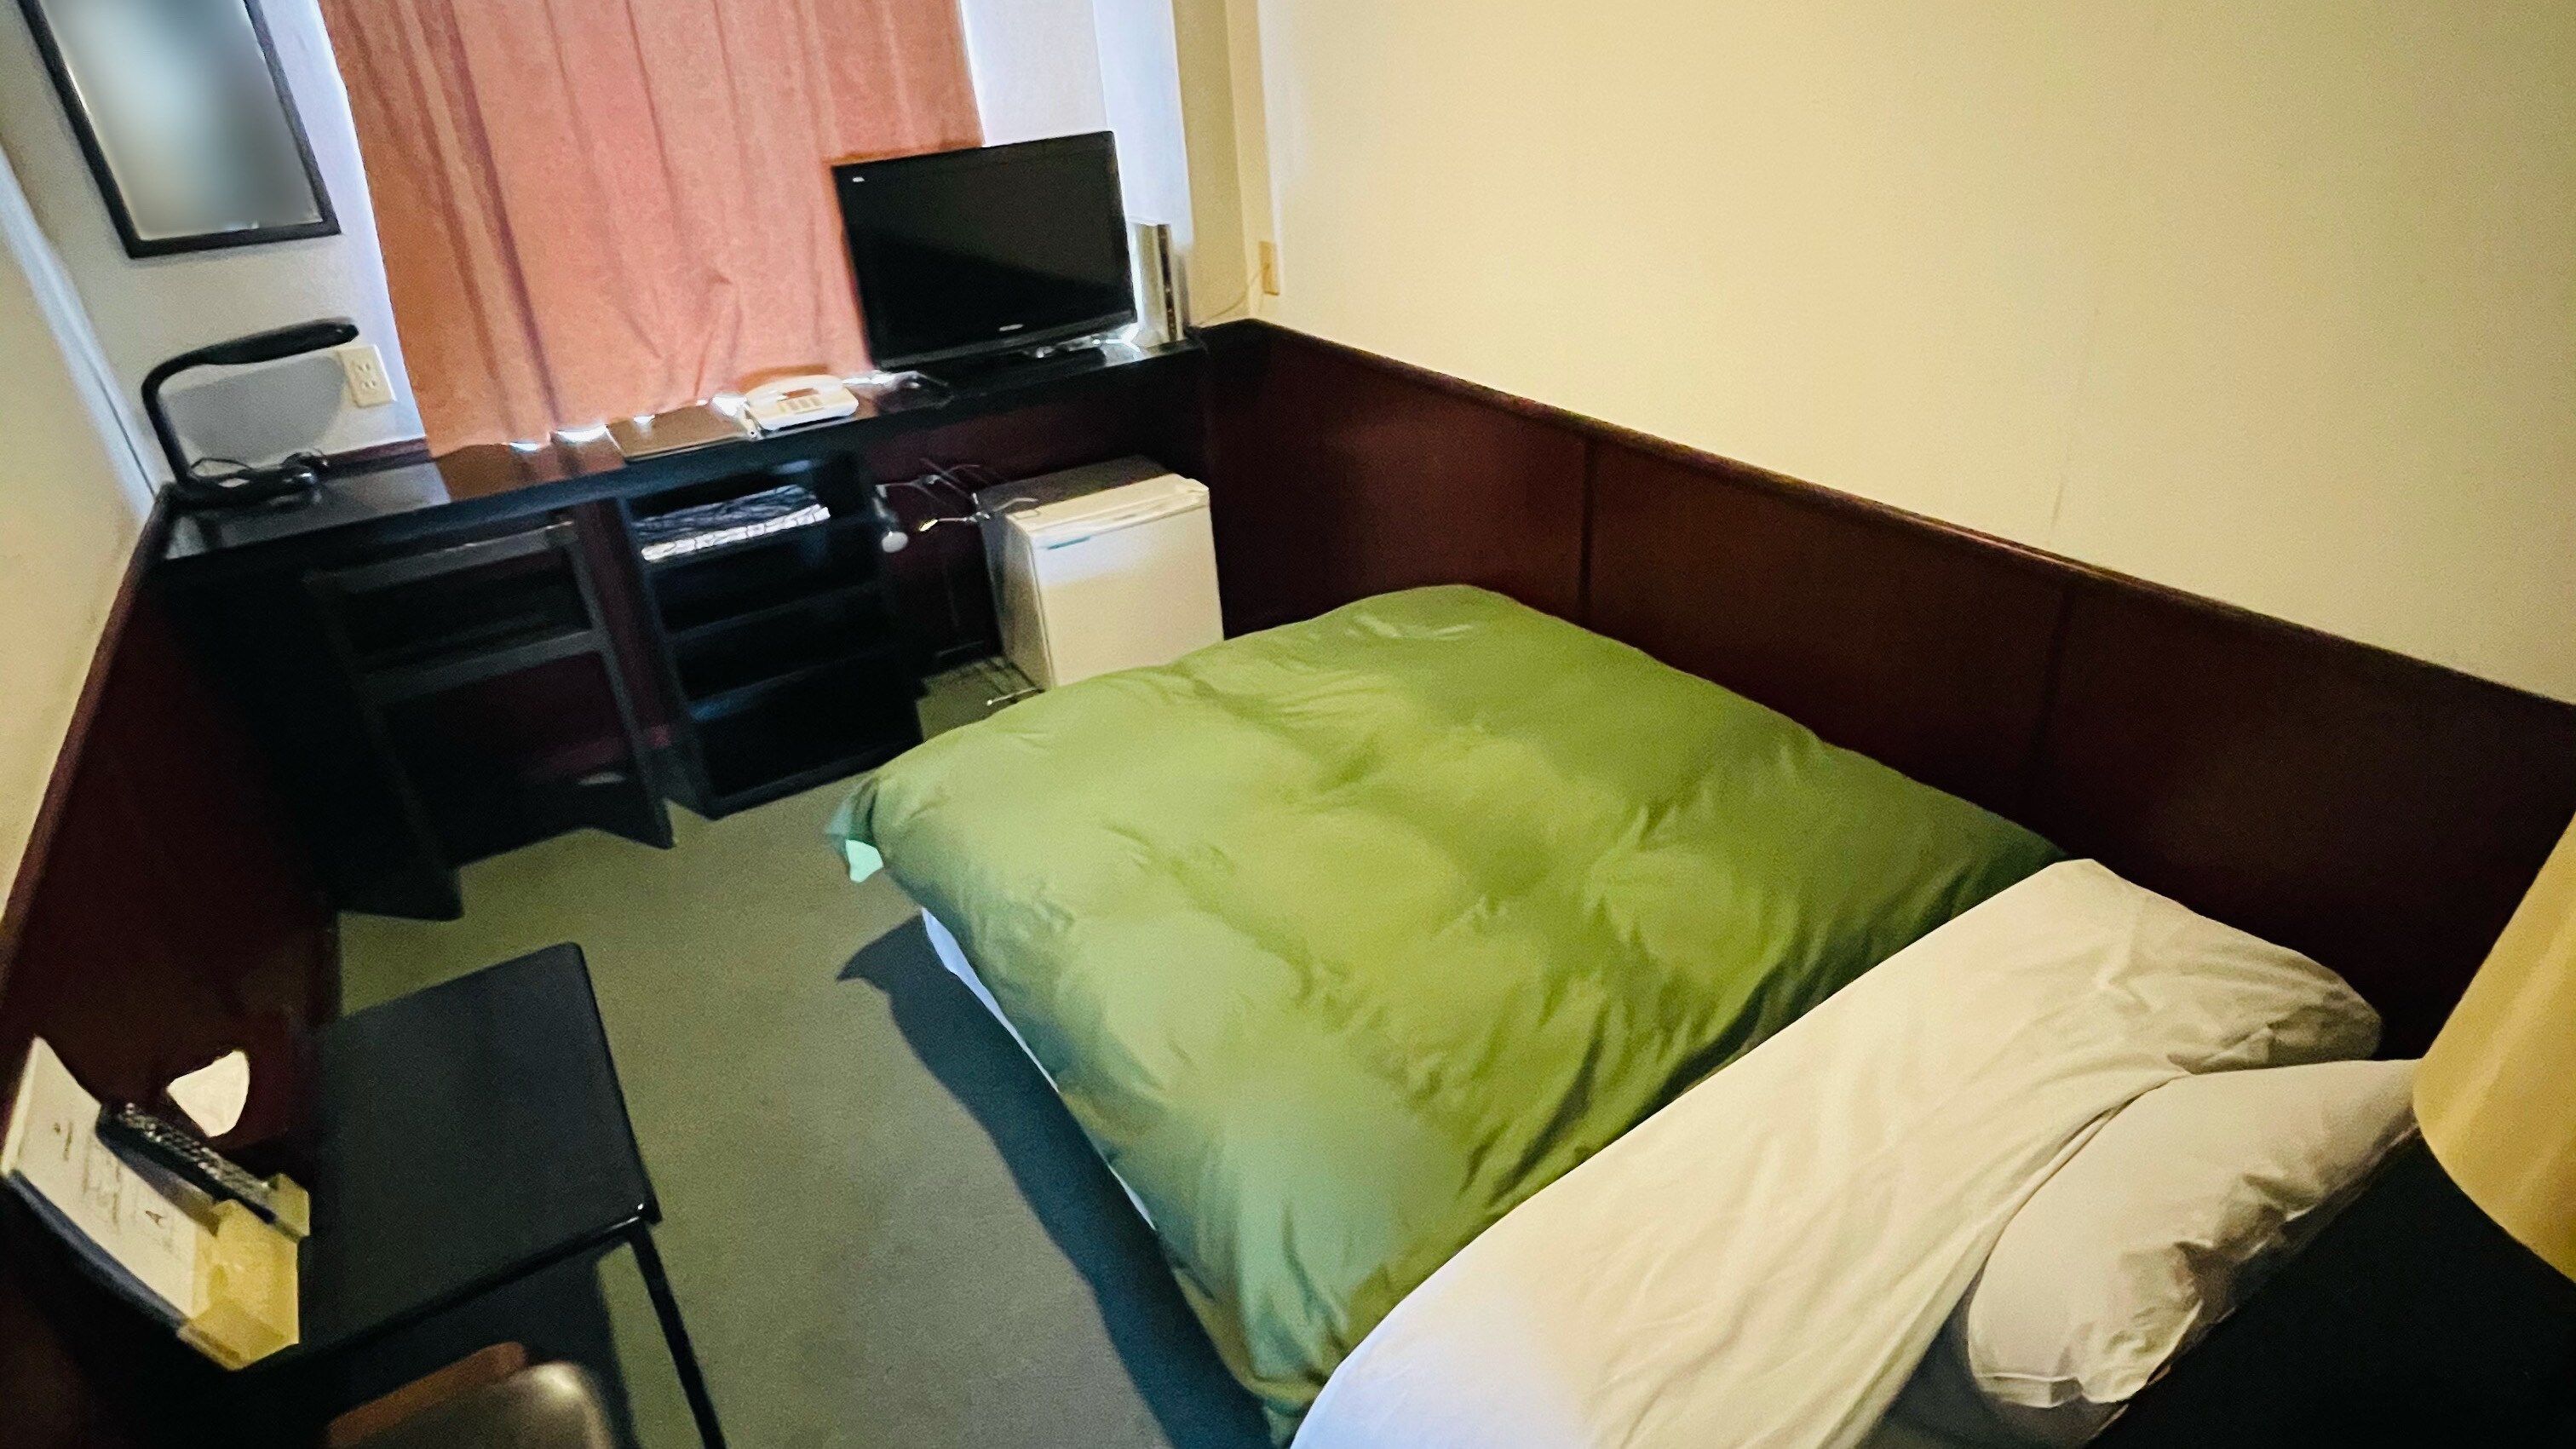 ・<SDS Room>Semi-double beds are available! Please use it for various purposes such as work and sightseeing.